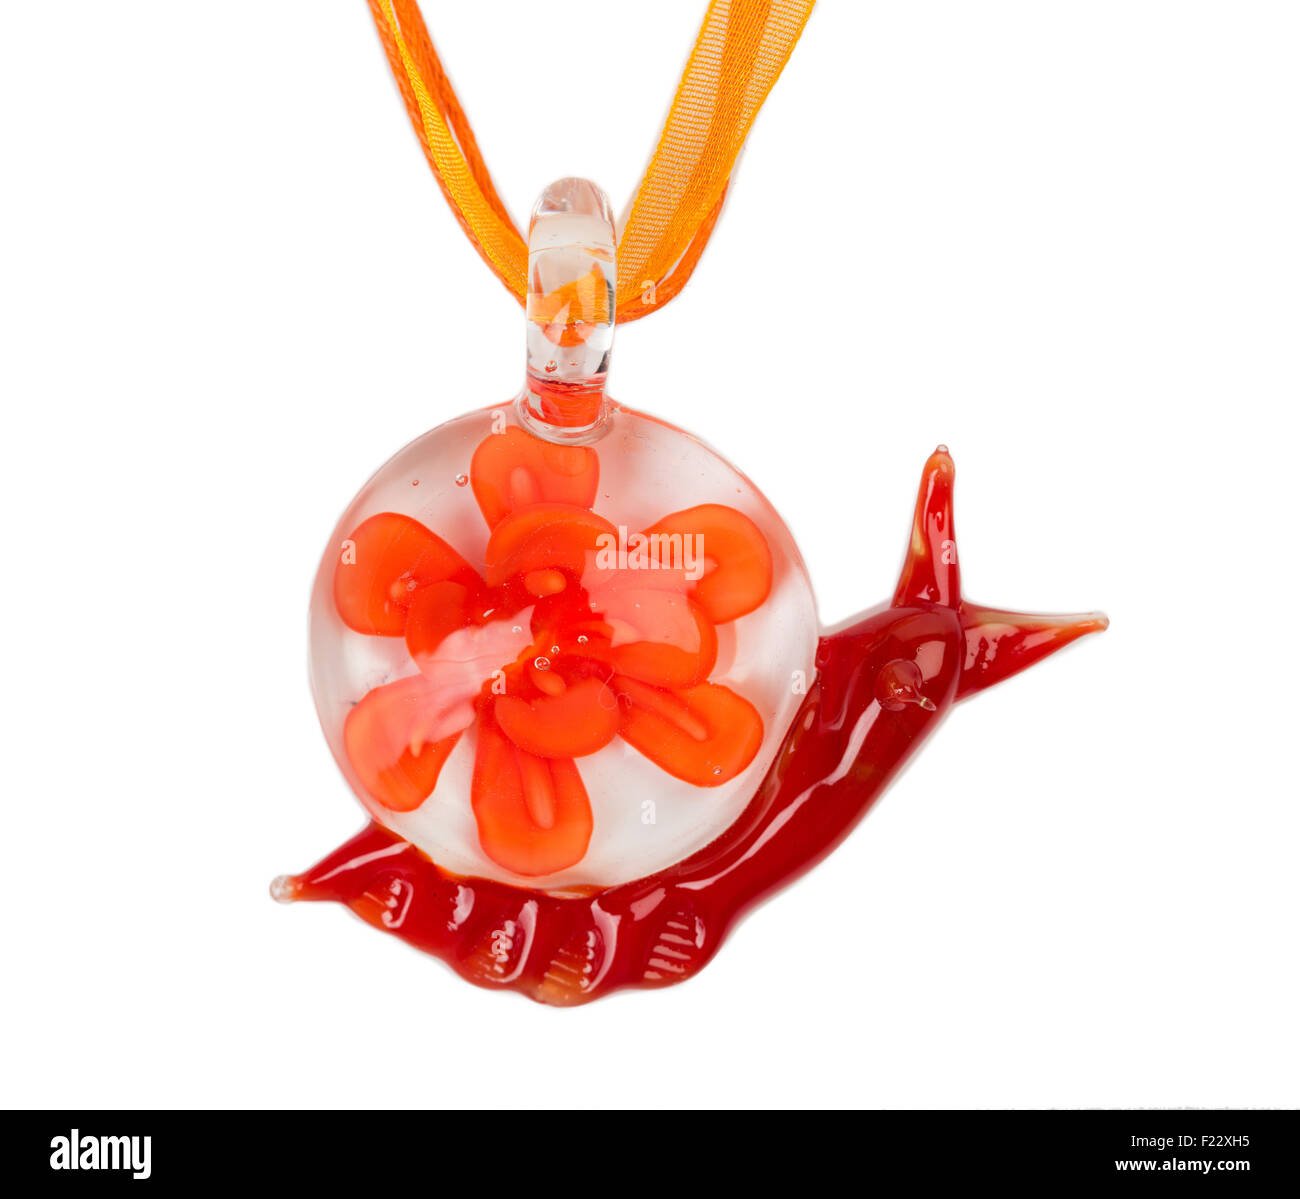 Murano glass necklace in the form of a snail. Isolate on white. Stock Photo